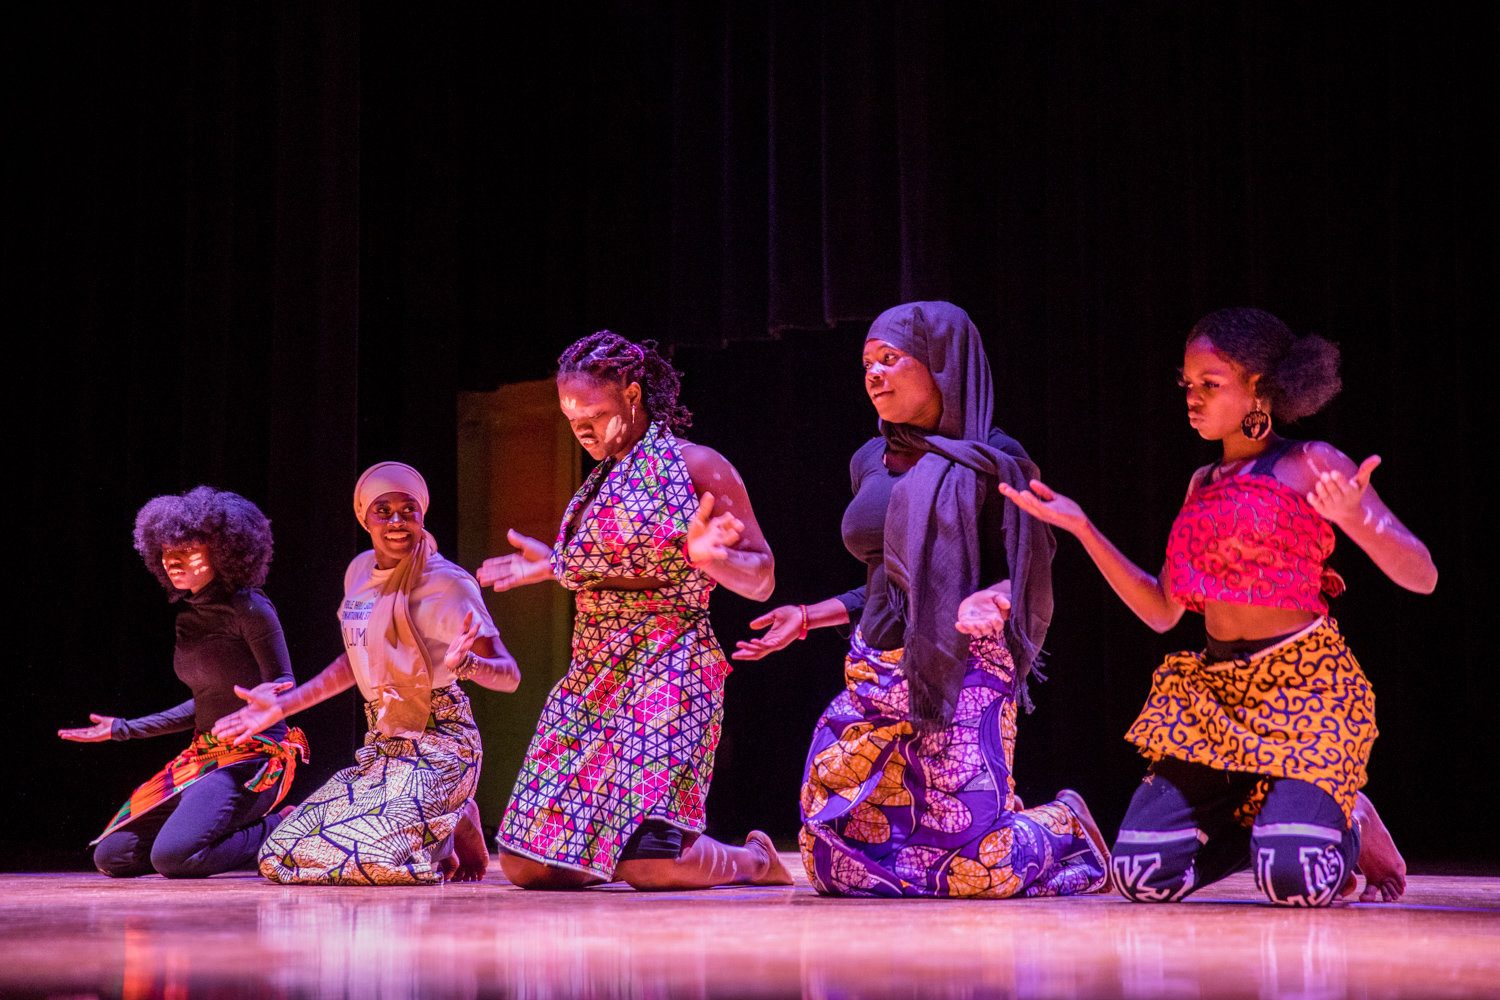 Students perform ‘African Roots’ for the Marble Hill School for International Studies’ second annual Black History Show, organized by the school’s new Black Student Union.